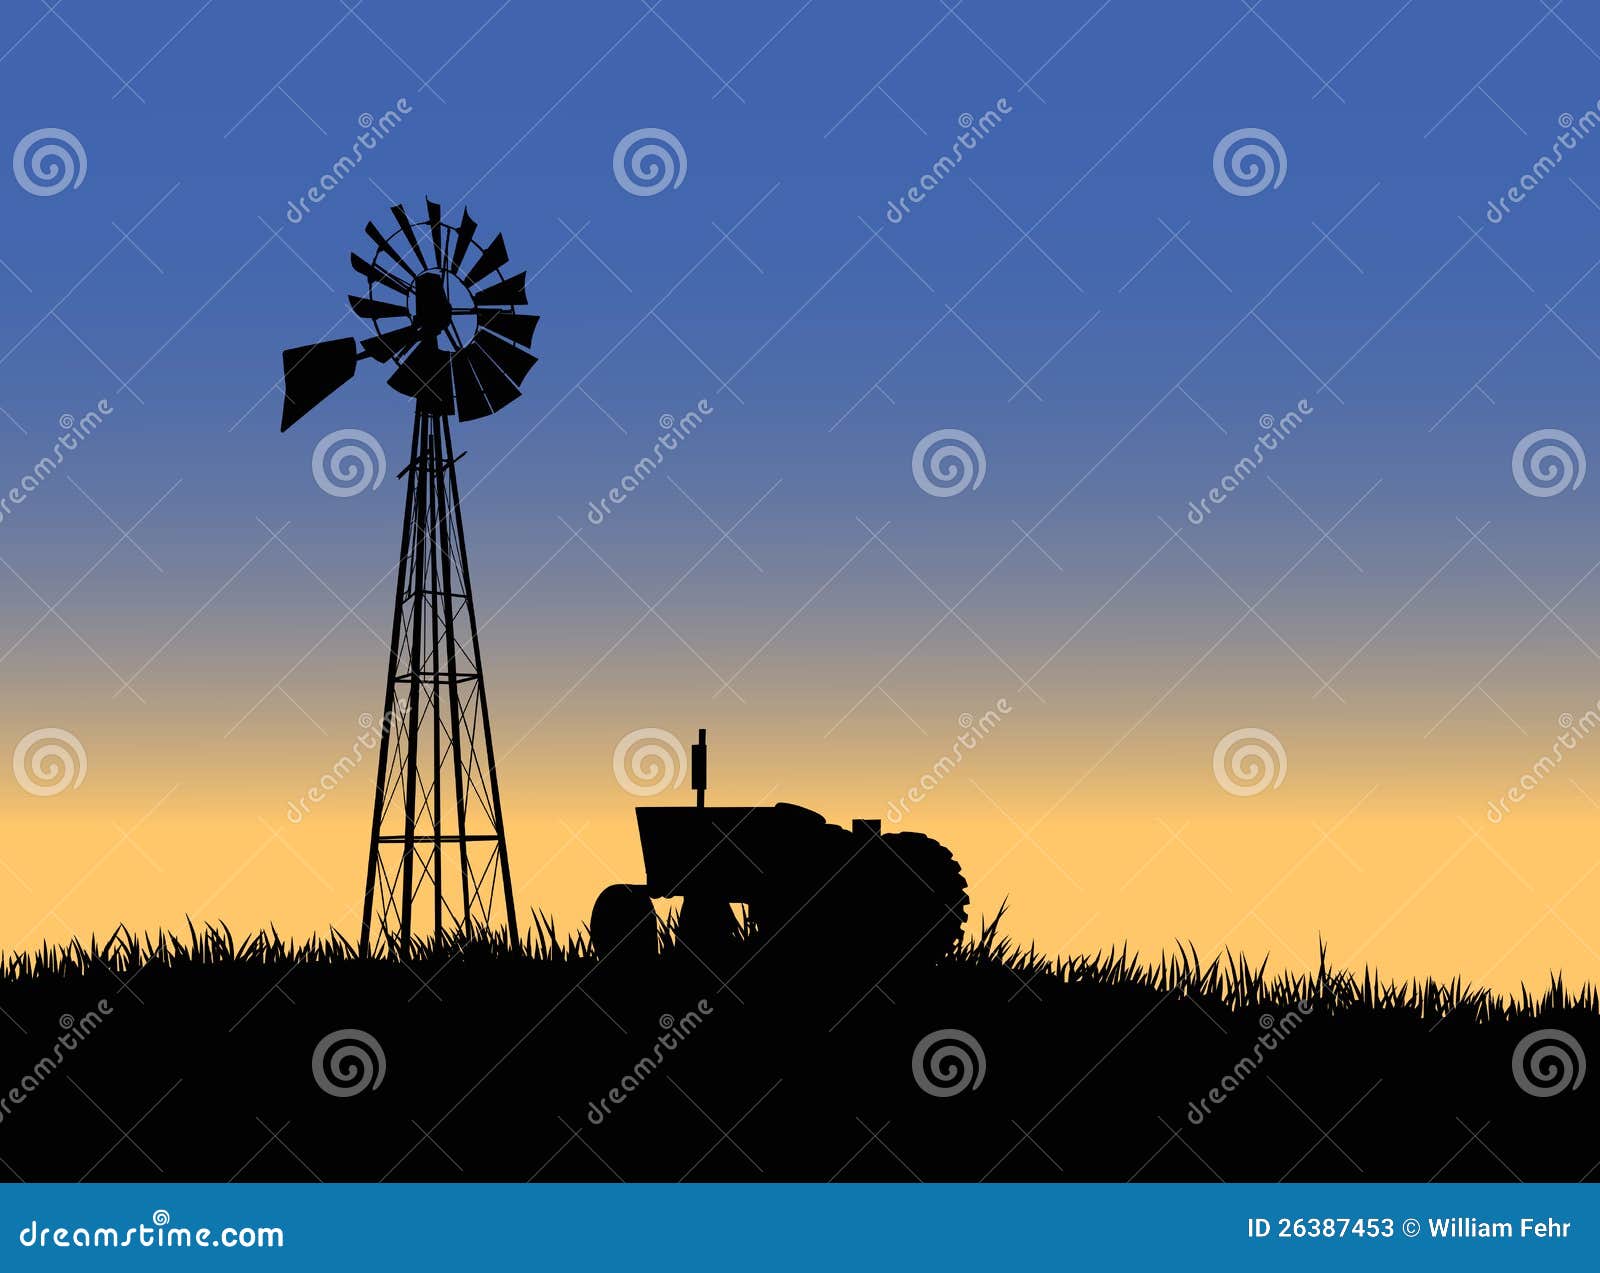 farm tractor with windmill